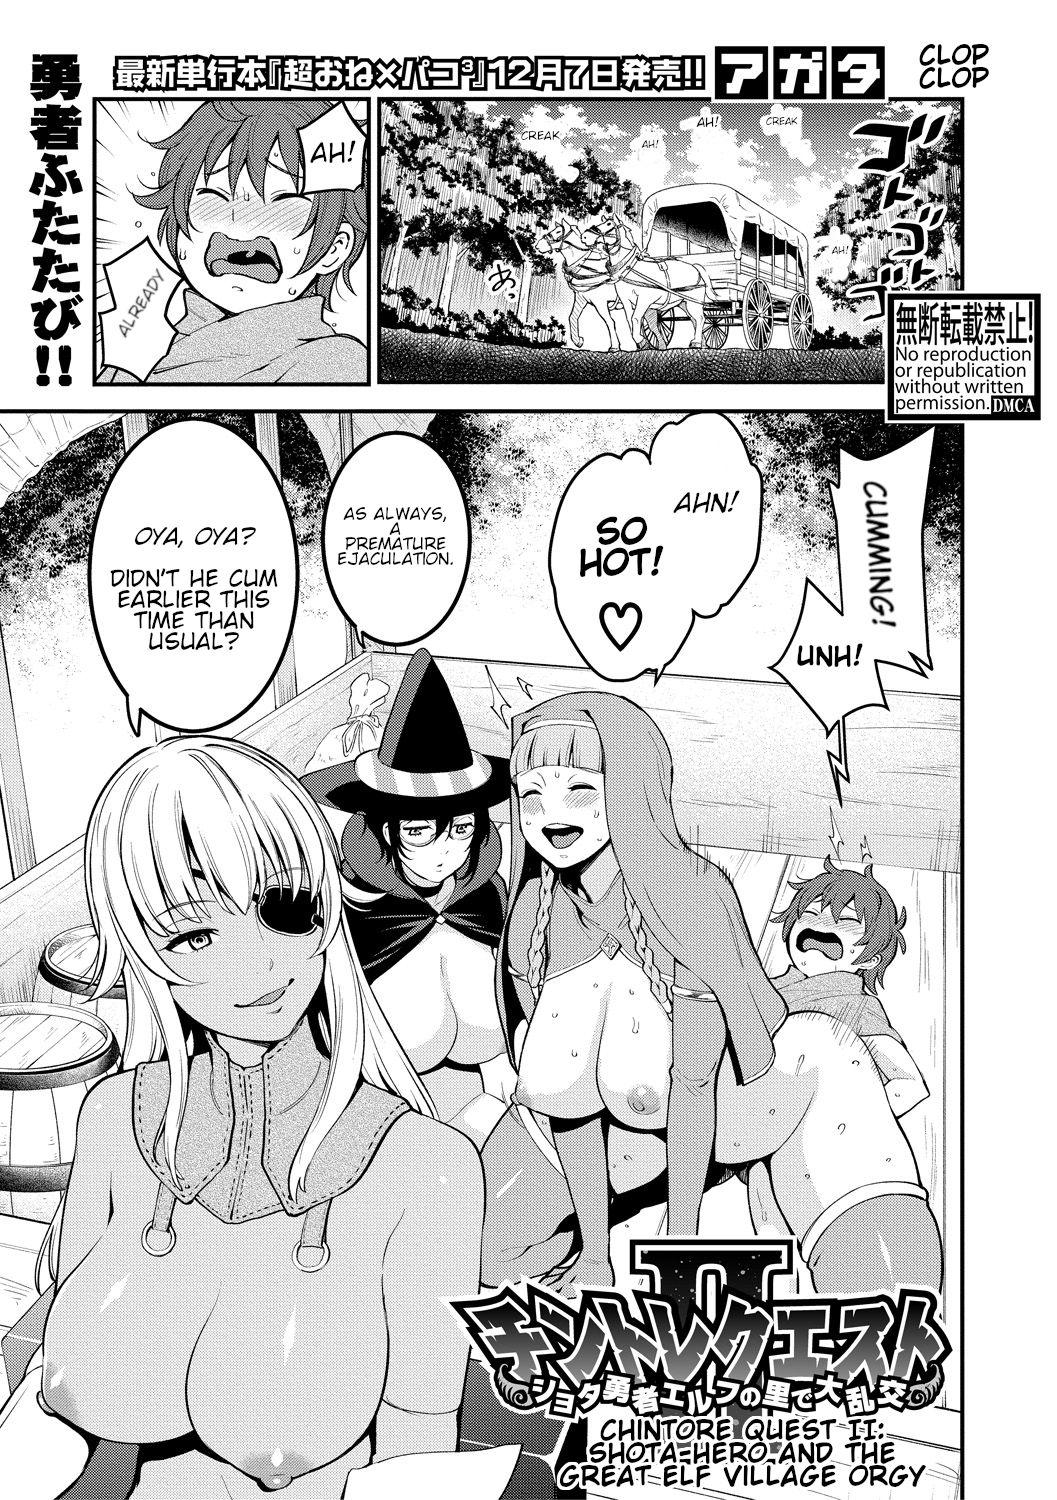 Bigtits Chintore Quest II: Shota Yuusha Elf no Sato de Dai Rankou | Chintore Quest II: Shota Hero and the Great Elf Village Orgy Pakistani - Picture 1